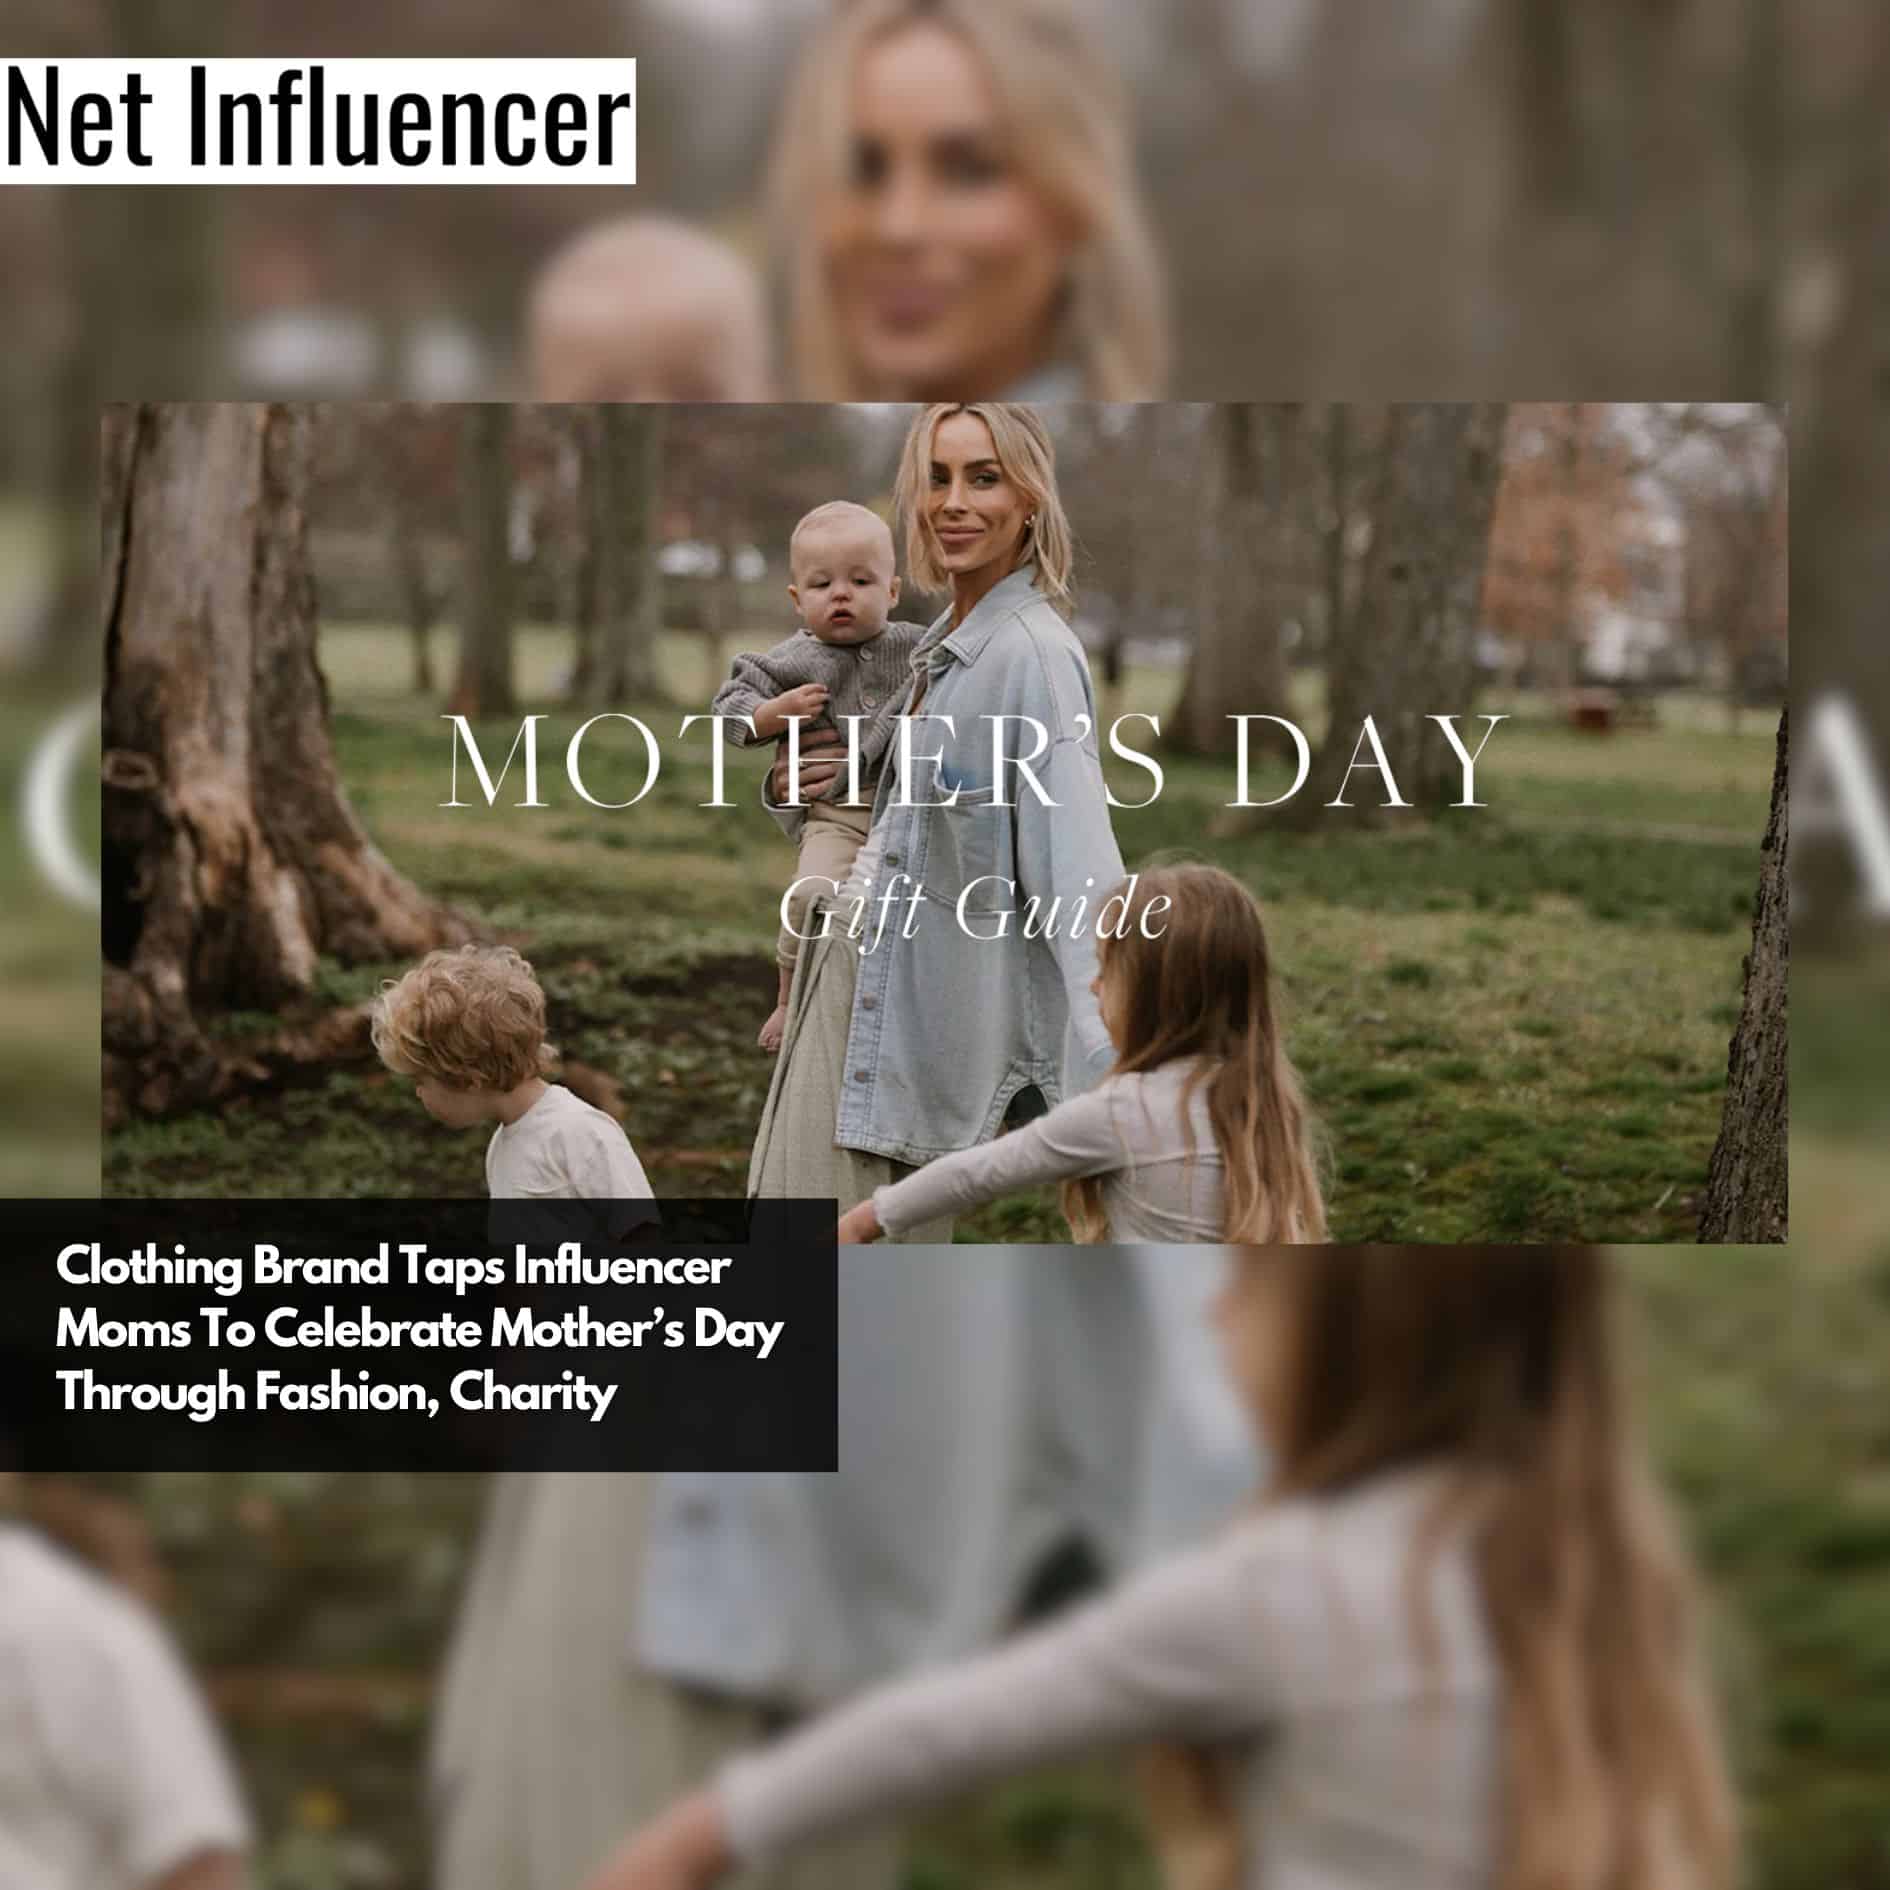 Clothing Brand Taps Influencer Moms To Celebrate Mother’s Day Through Fashion, Charity